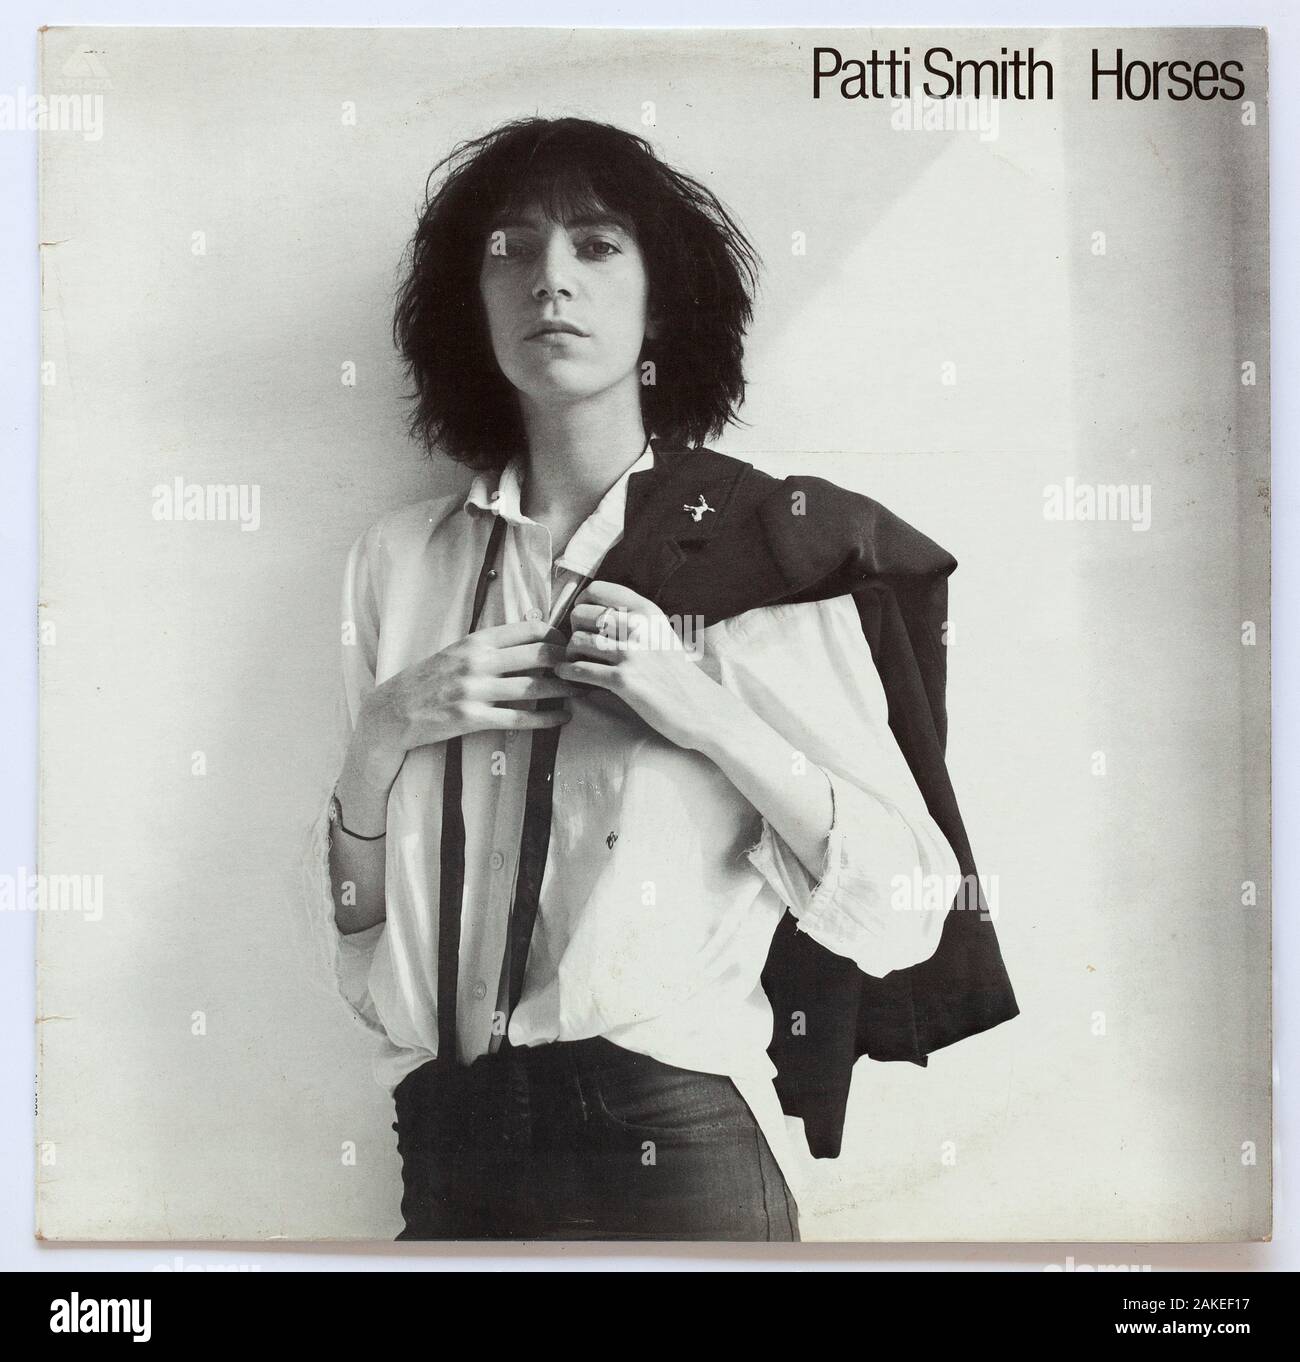 The cover of Horses,  1975 album by Patti Smith on Arista Editorial use only Stock Photo